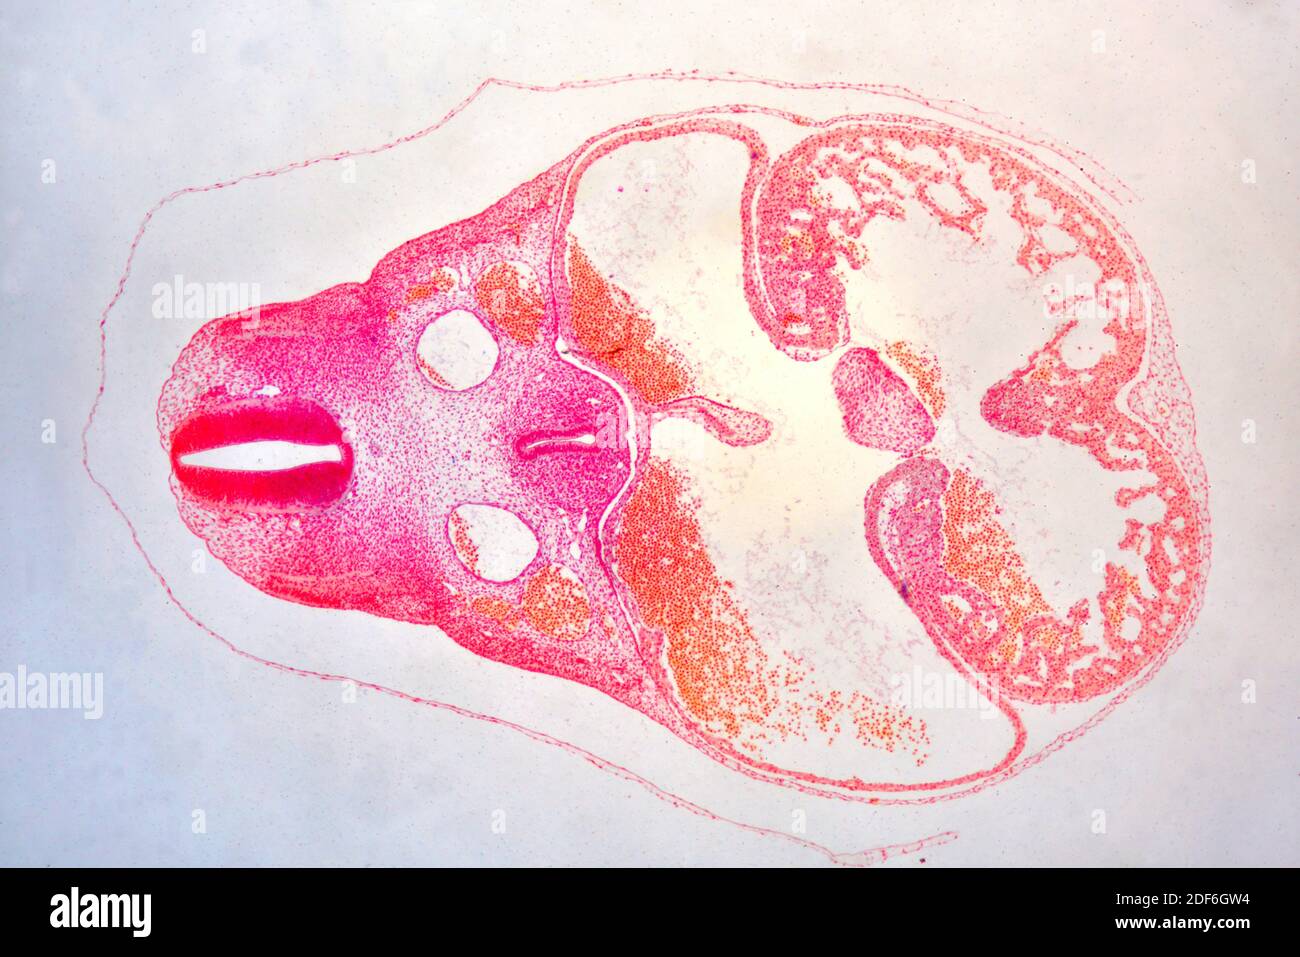 Pig embryo cross section showing spine, foregut, pleural cavity, heart and head. Optical microscope X40. Stock Photo